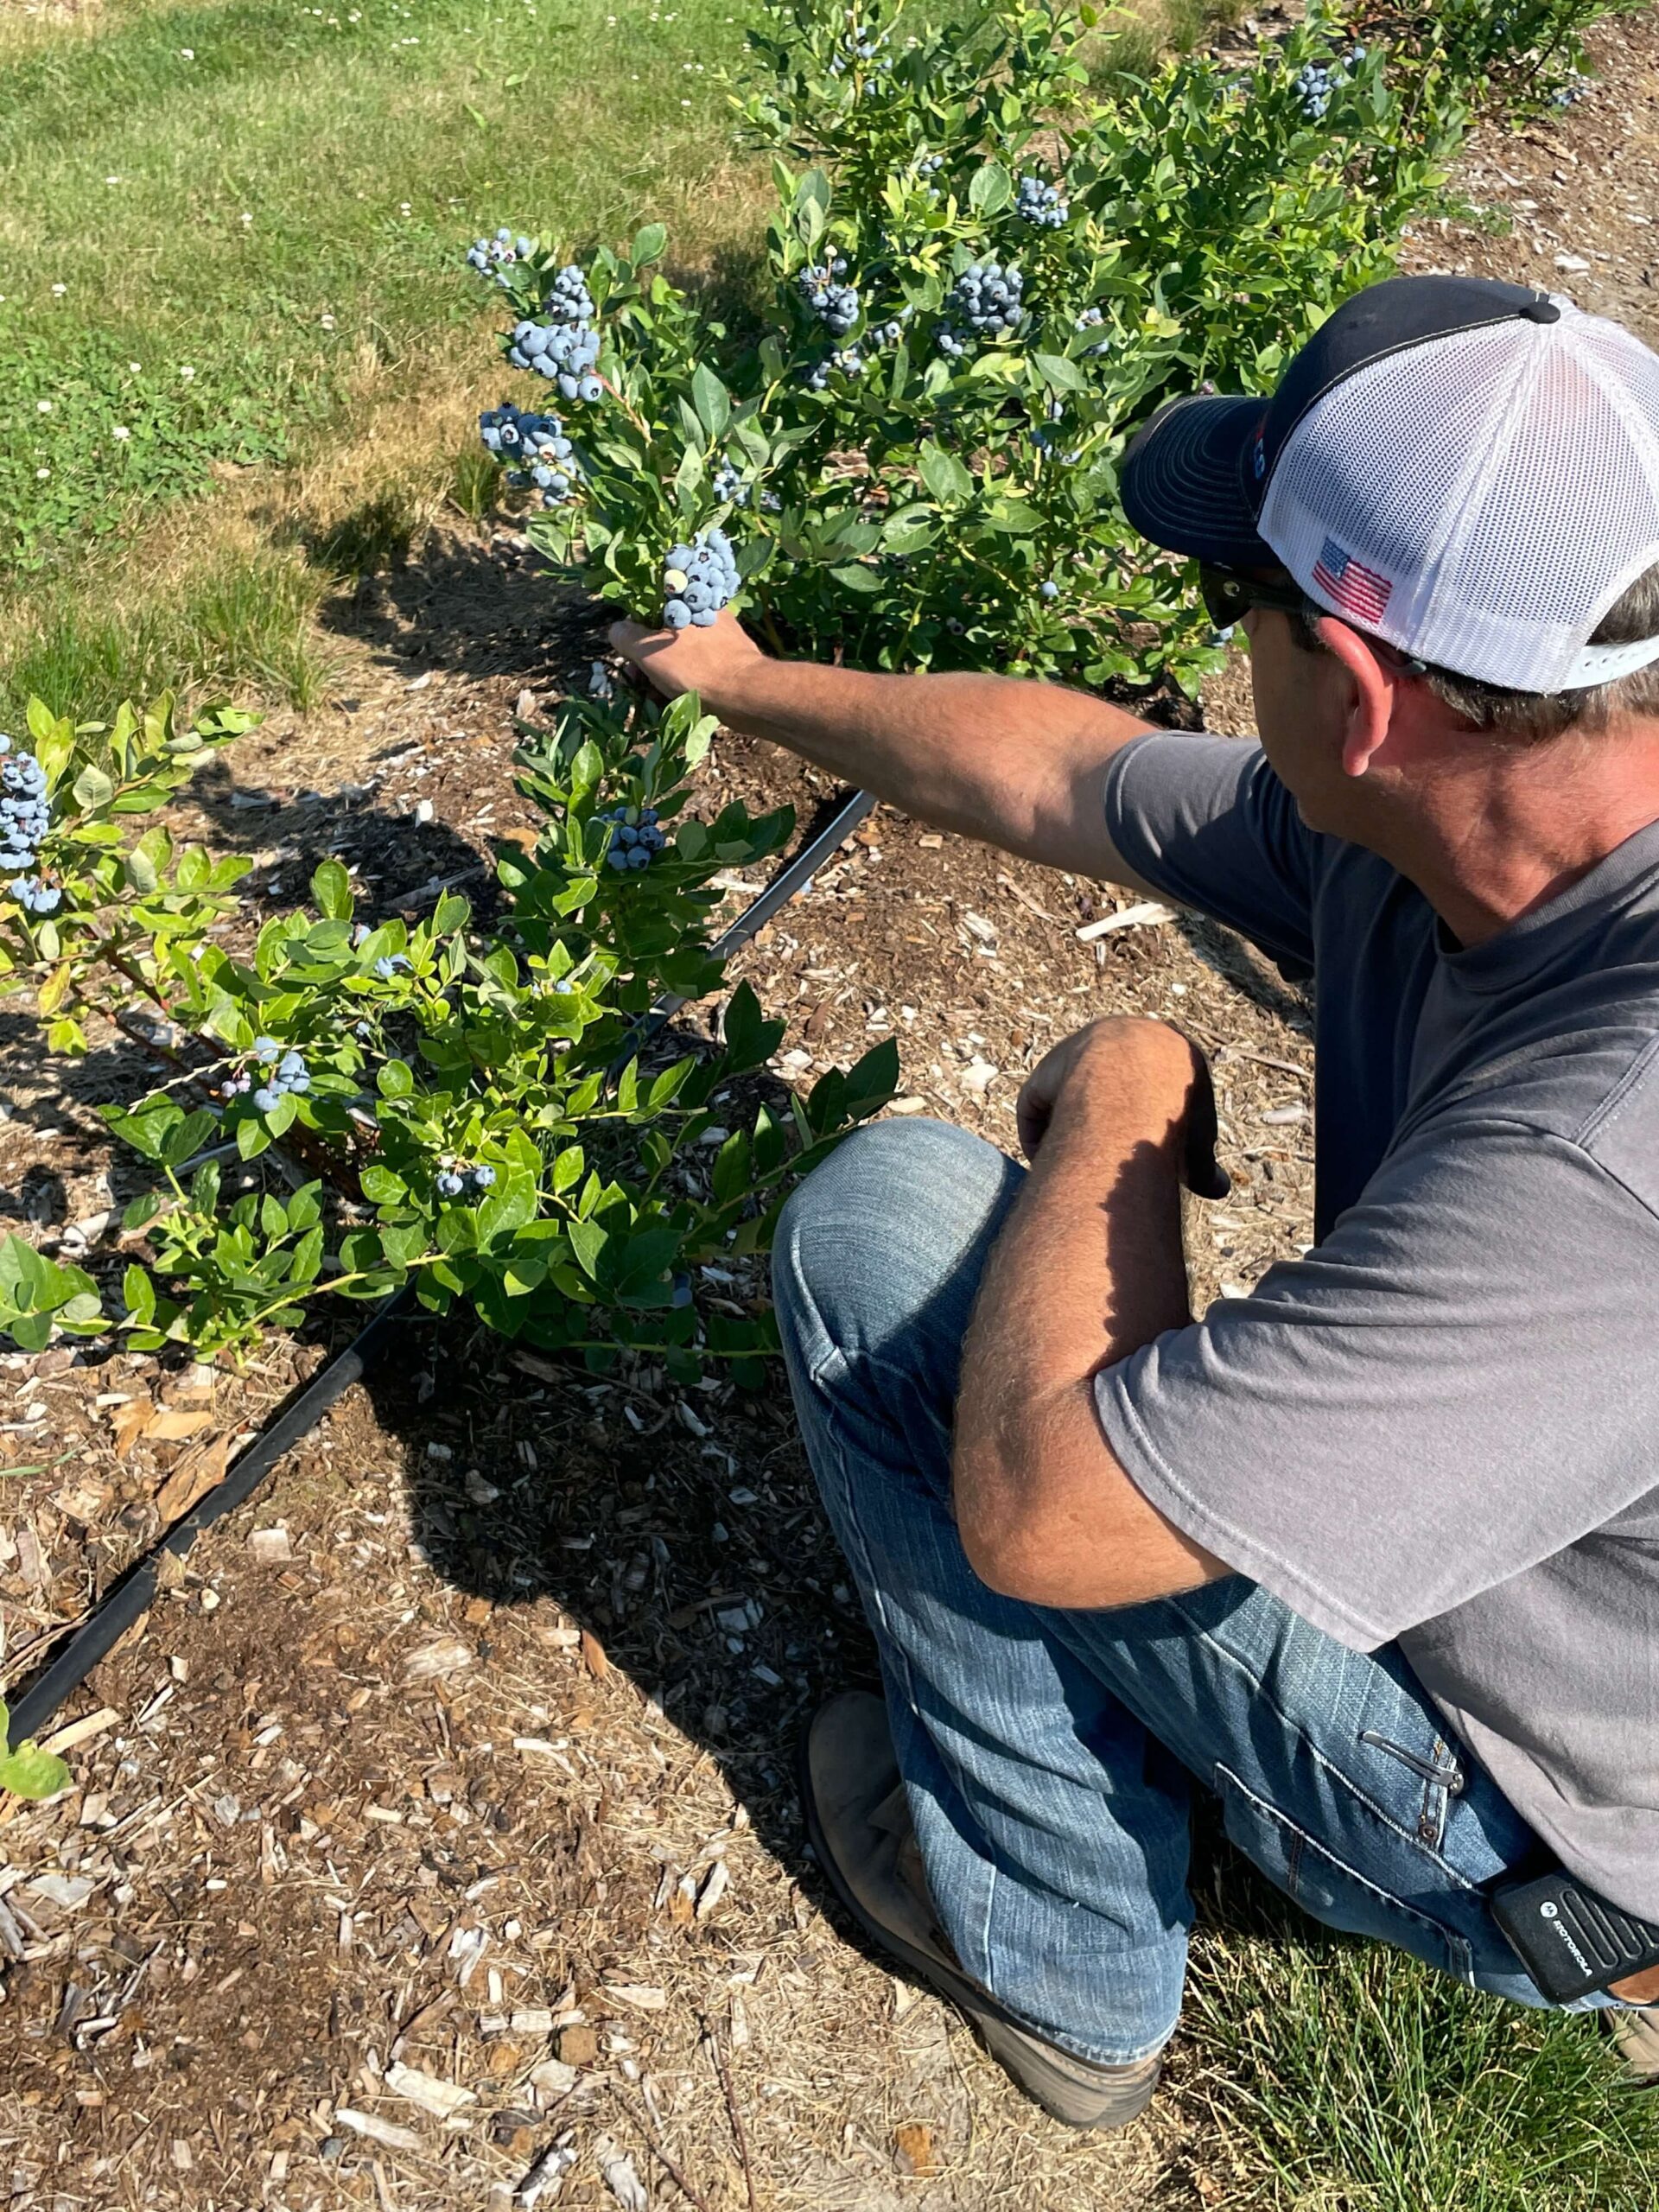 Lakeside: Owner bent down looking at blueberry bush